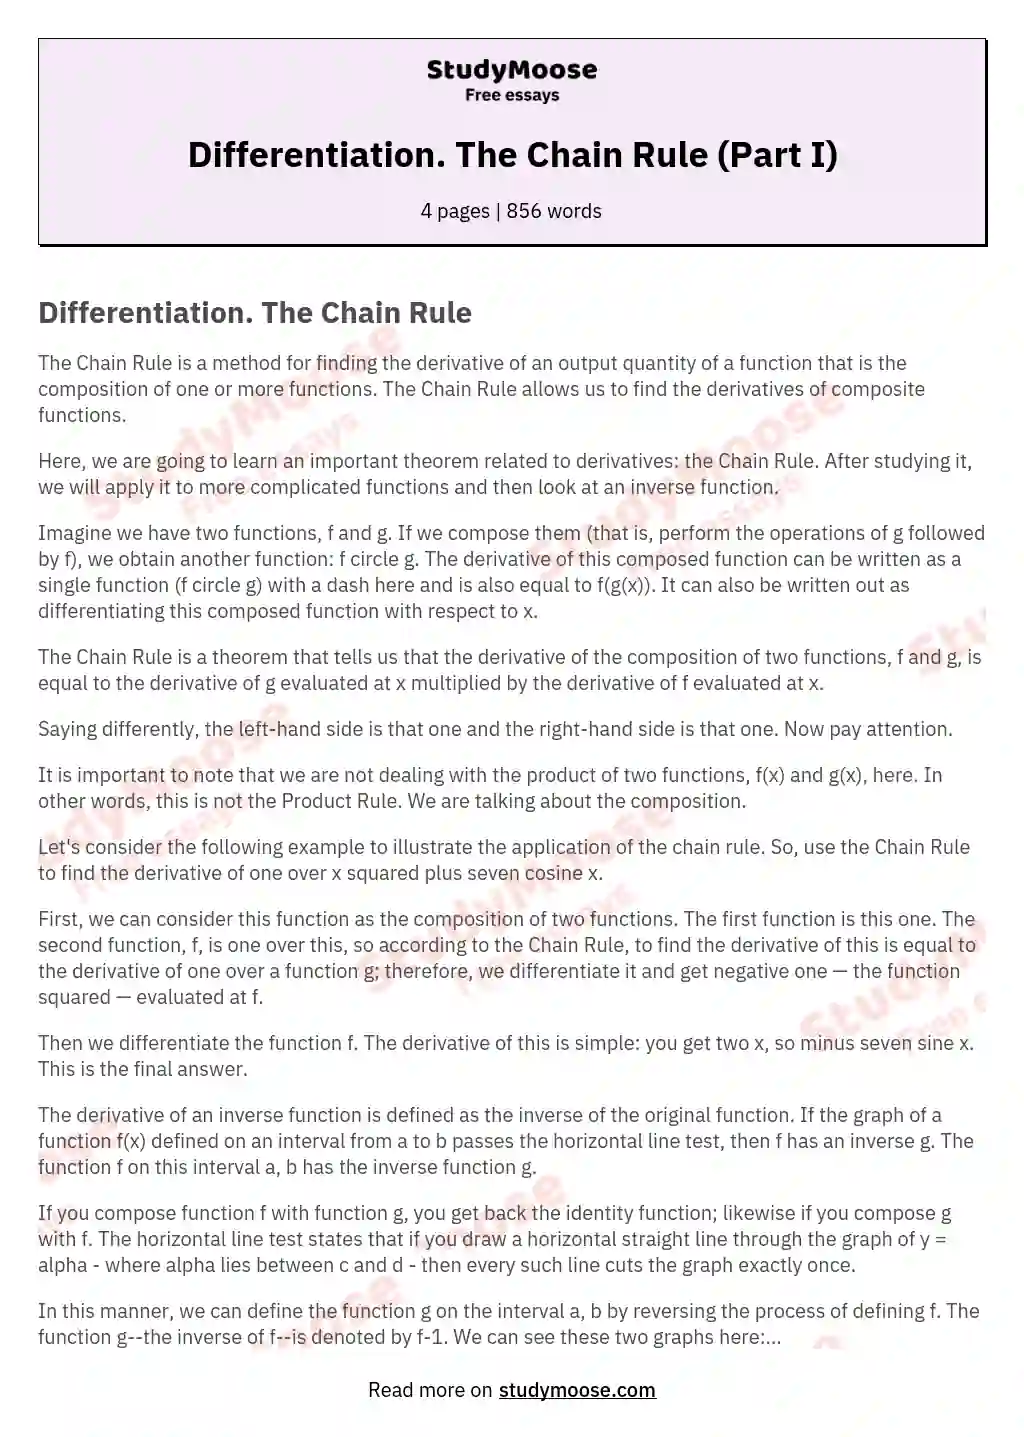 Differentiation. The Chain Rule (Part I) essay